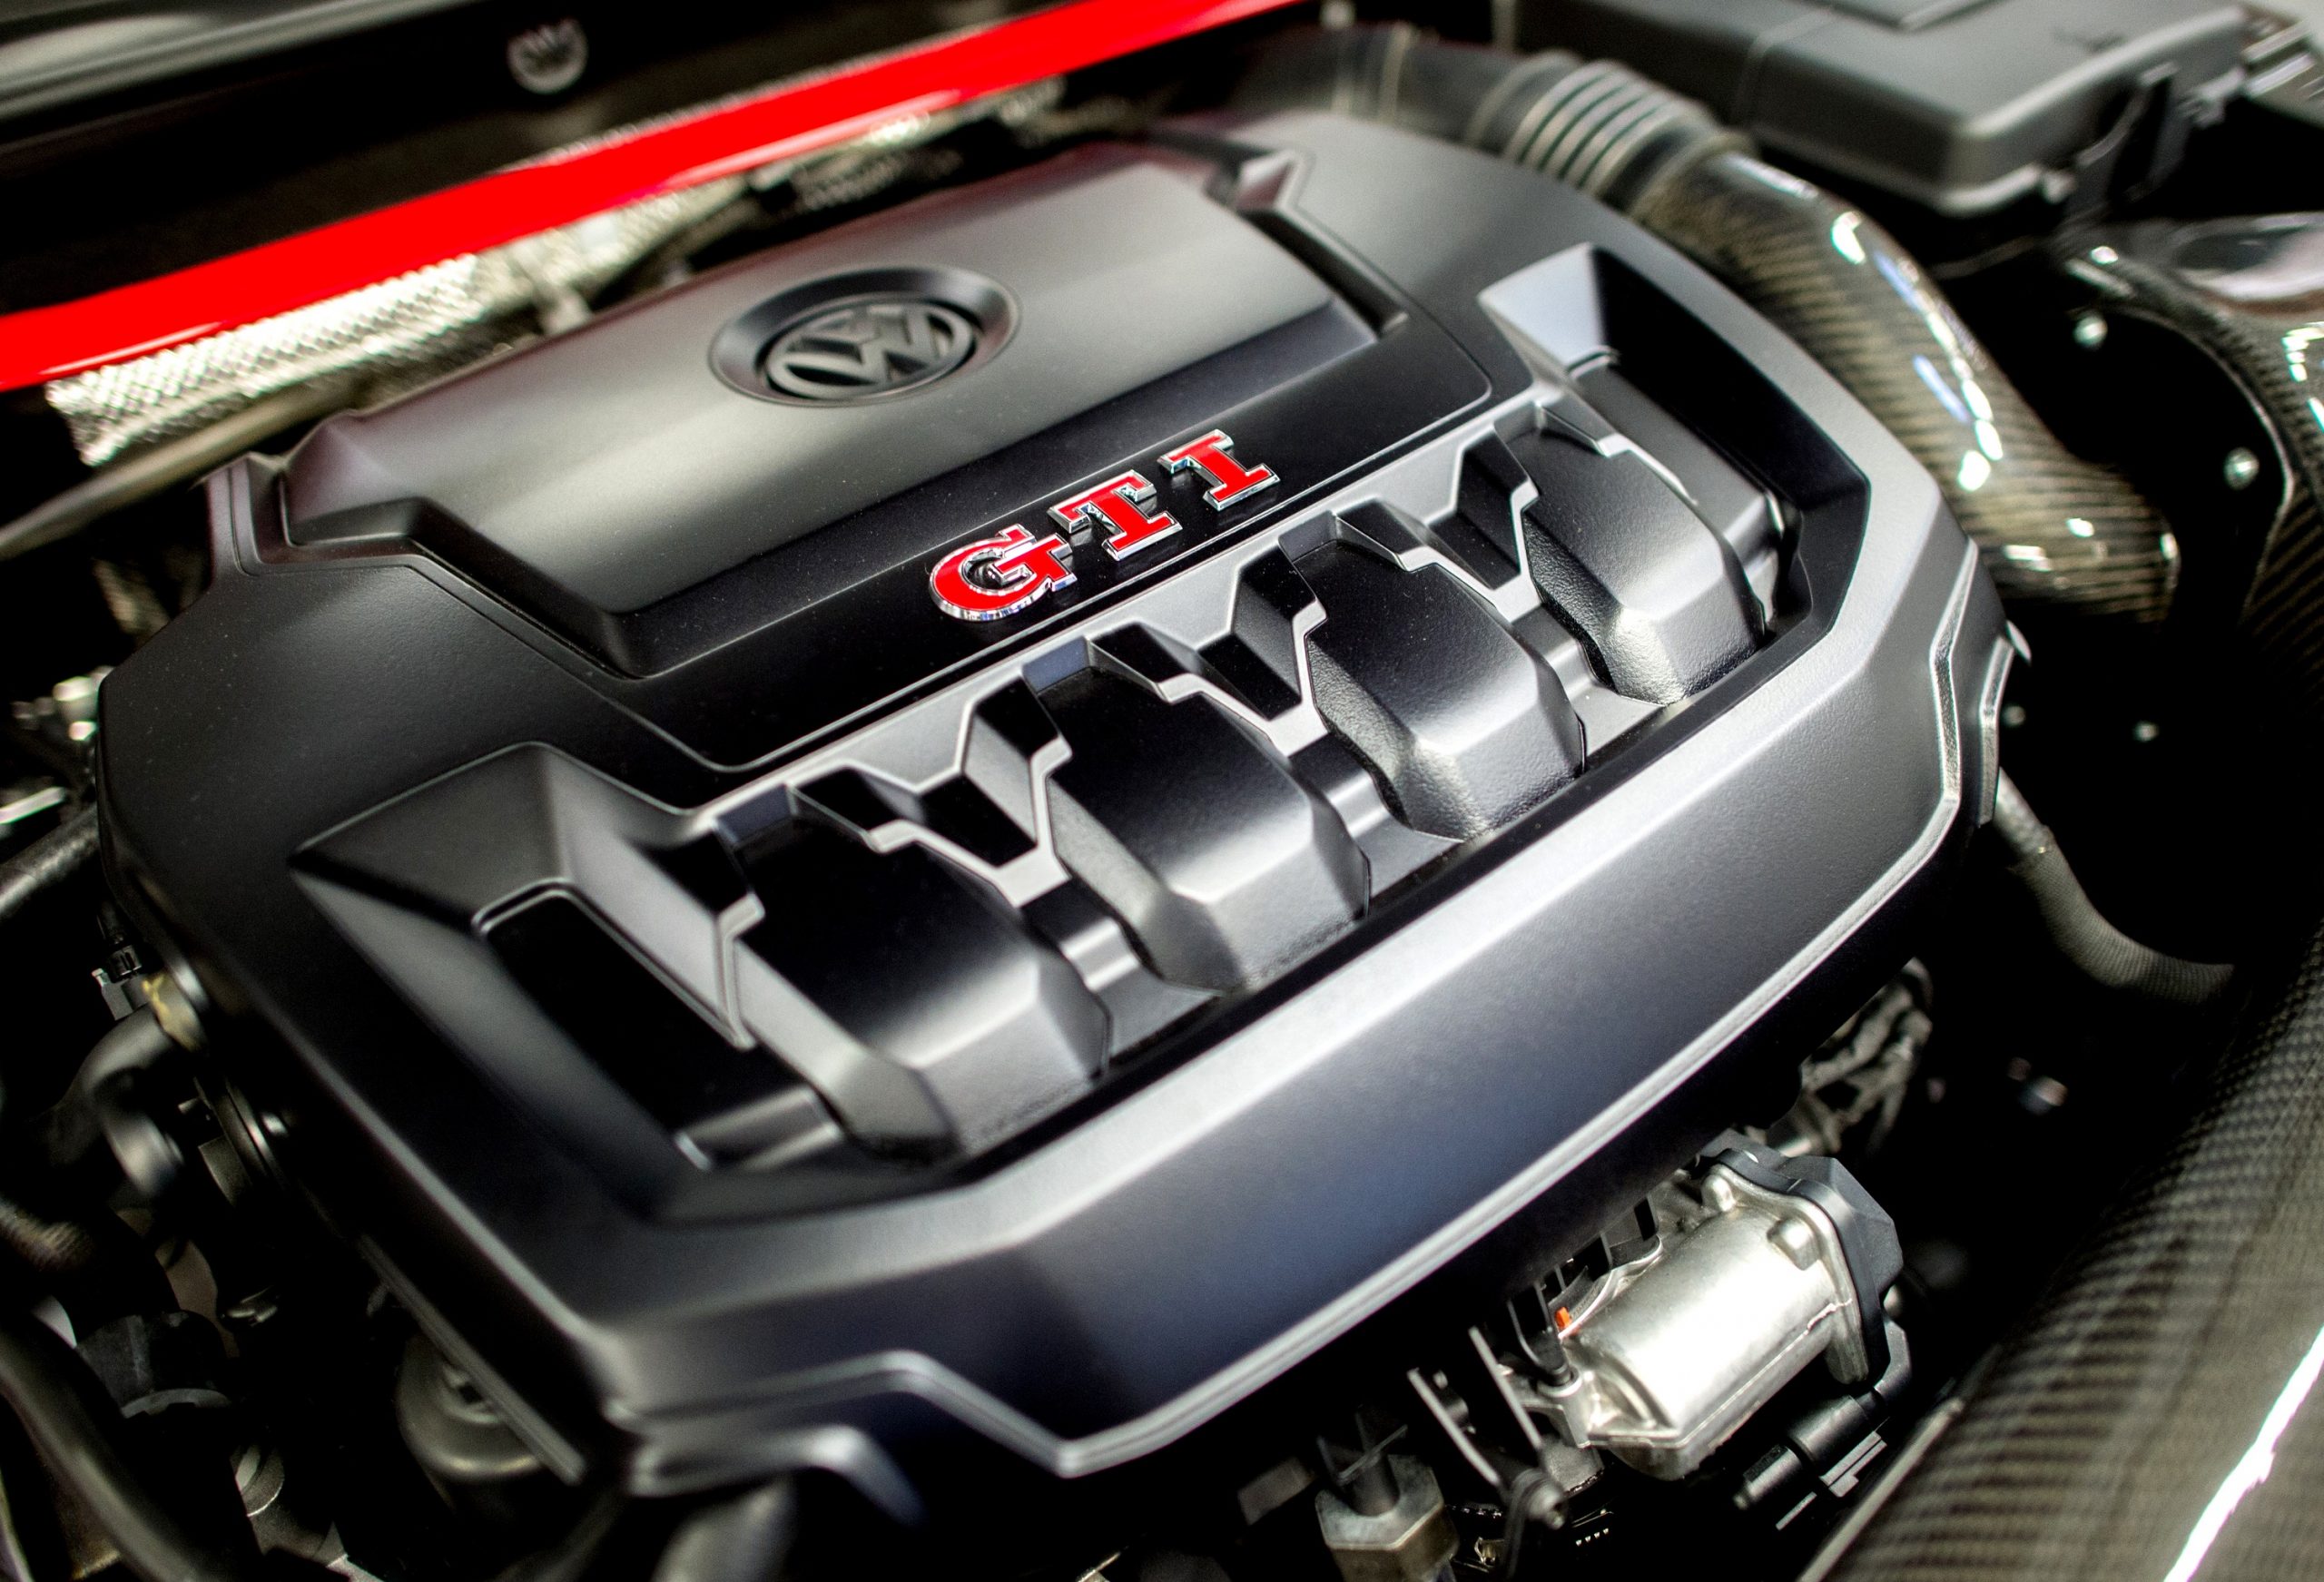 The engine bay of a Volkswagen GTI